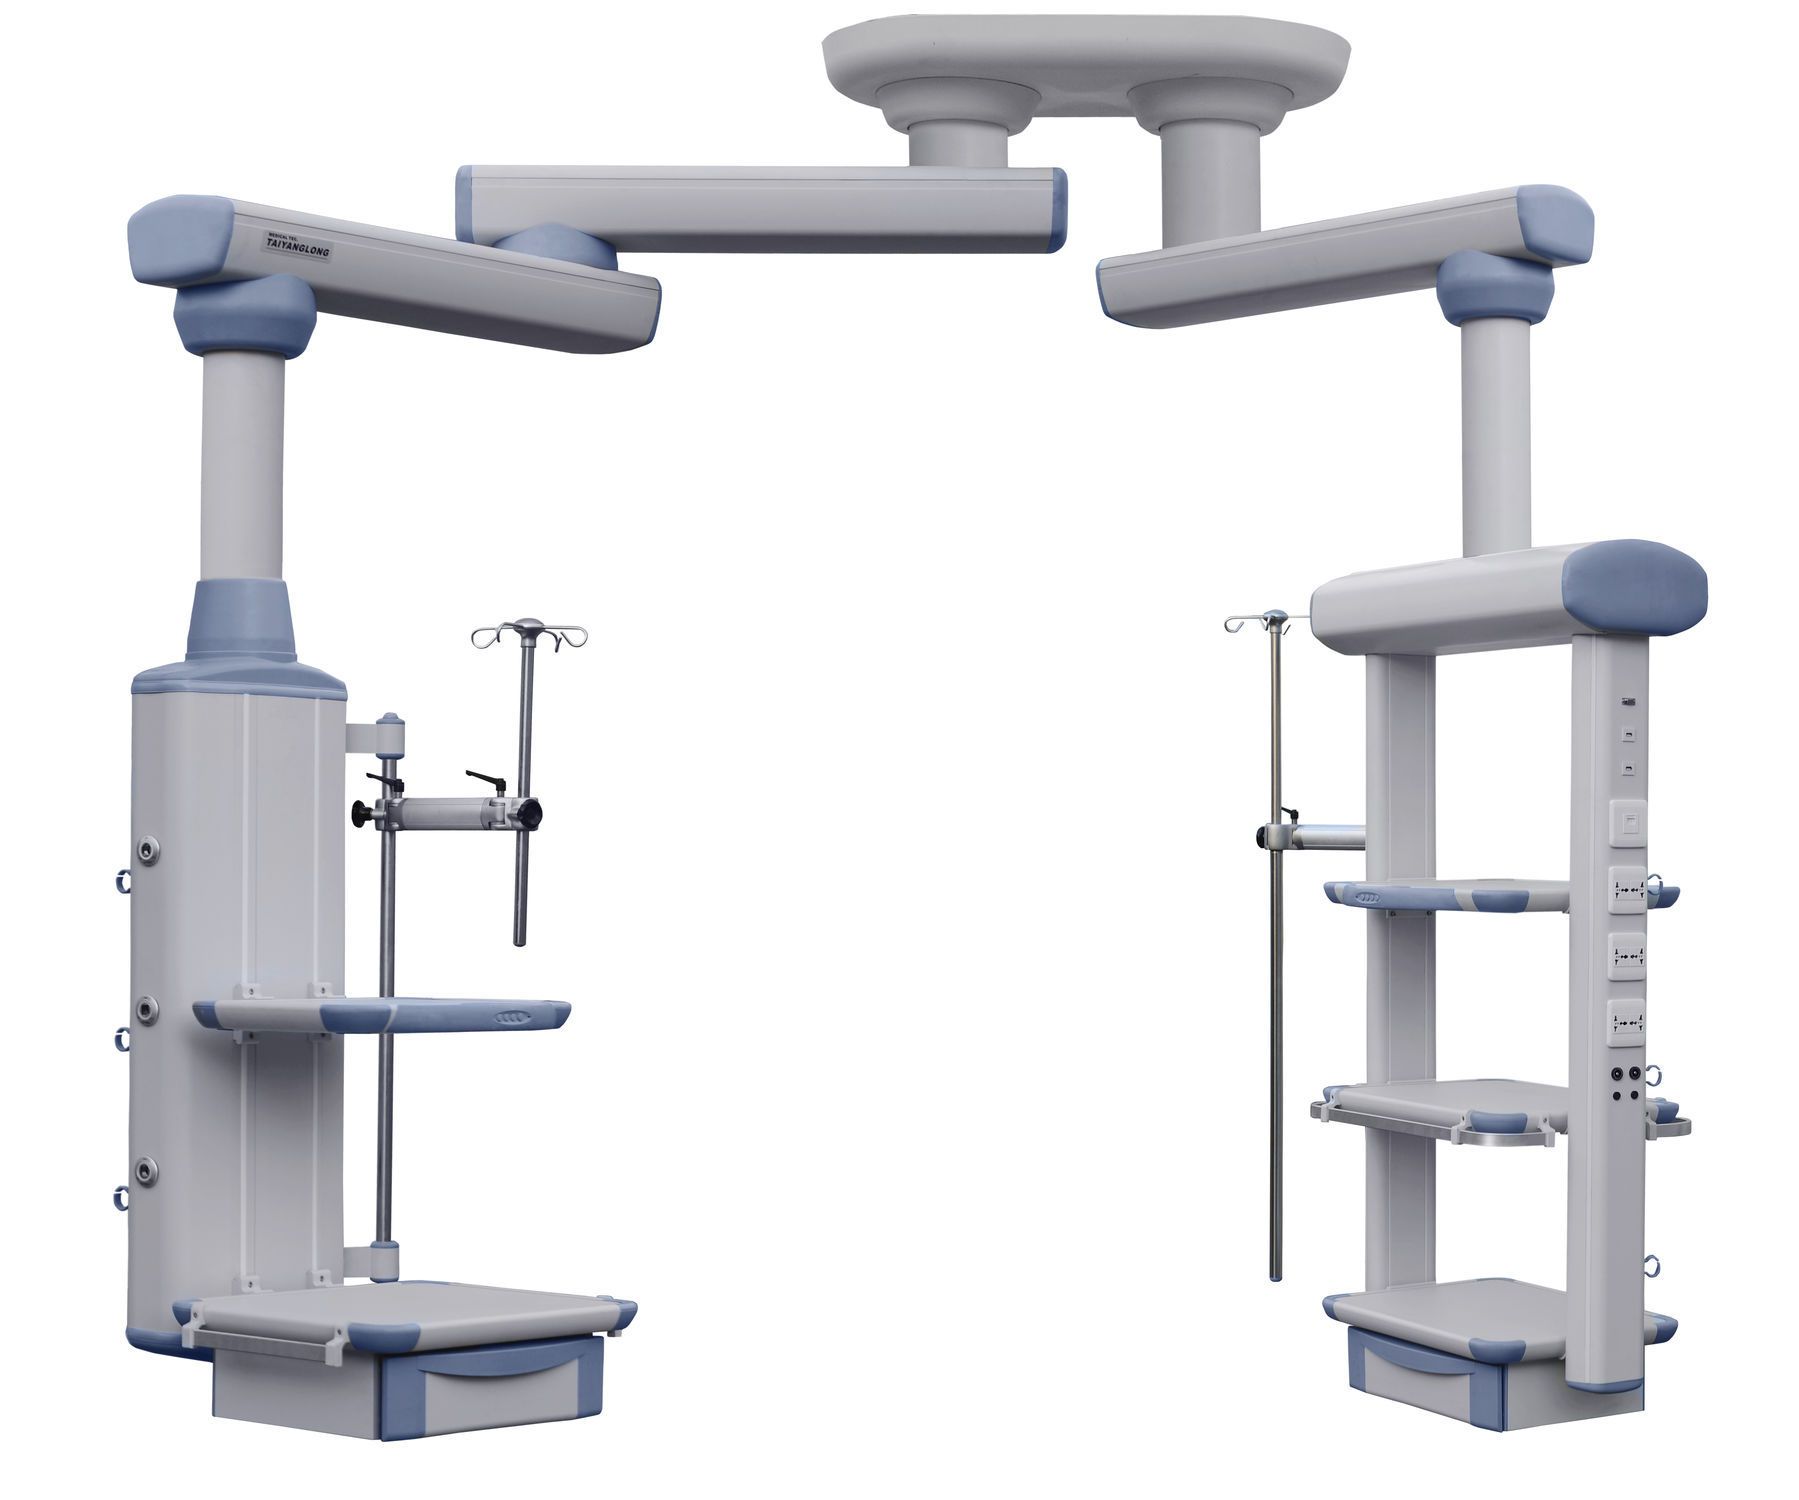 Ceiling-mounted double medical pendant / articulated / motorized / single-arm YDT-IDT-2 Hunan taiyanglong medical